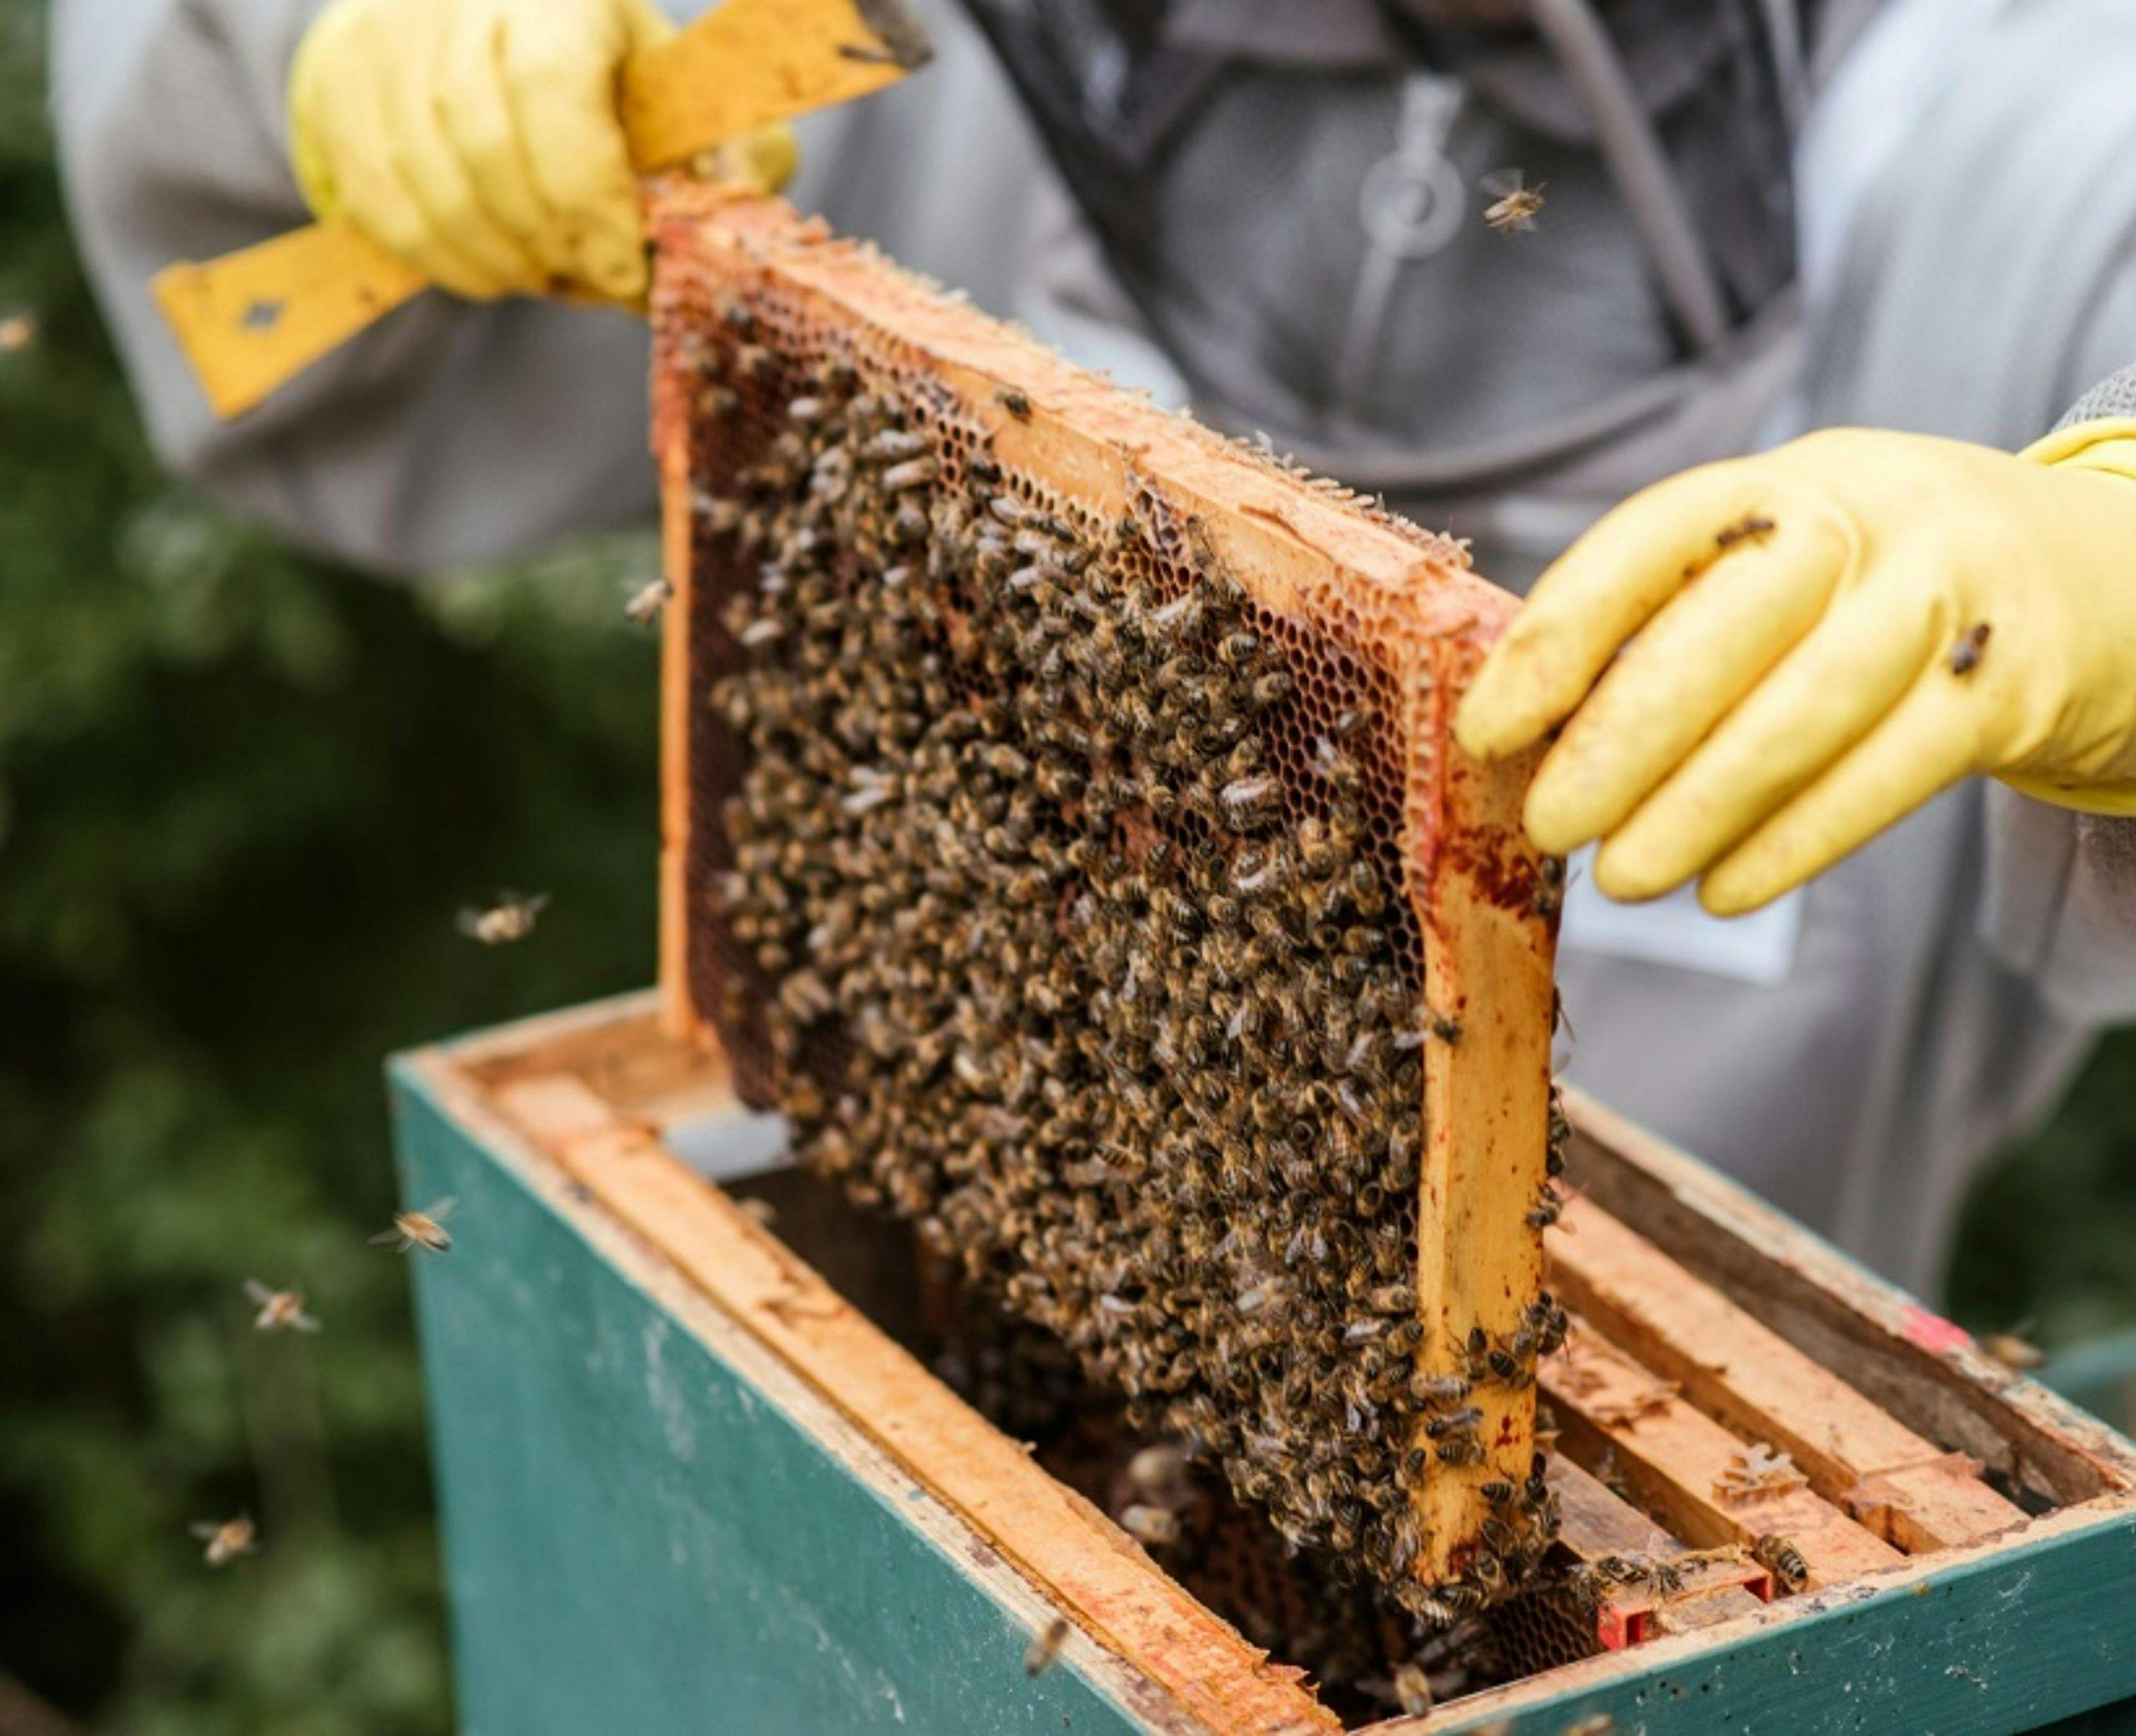 Close-up of a wooden beehive frame. A beekeeper wearing yellow gloves holds a beehive frame covered in european honey bees above a green beekeeping box.